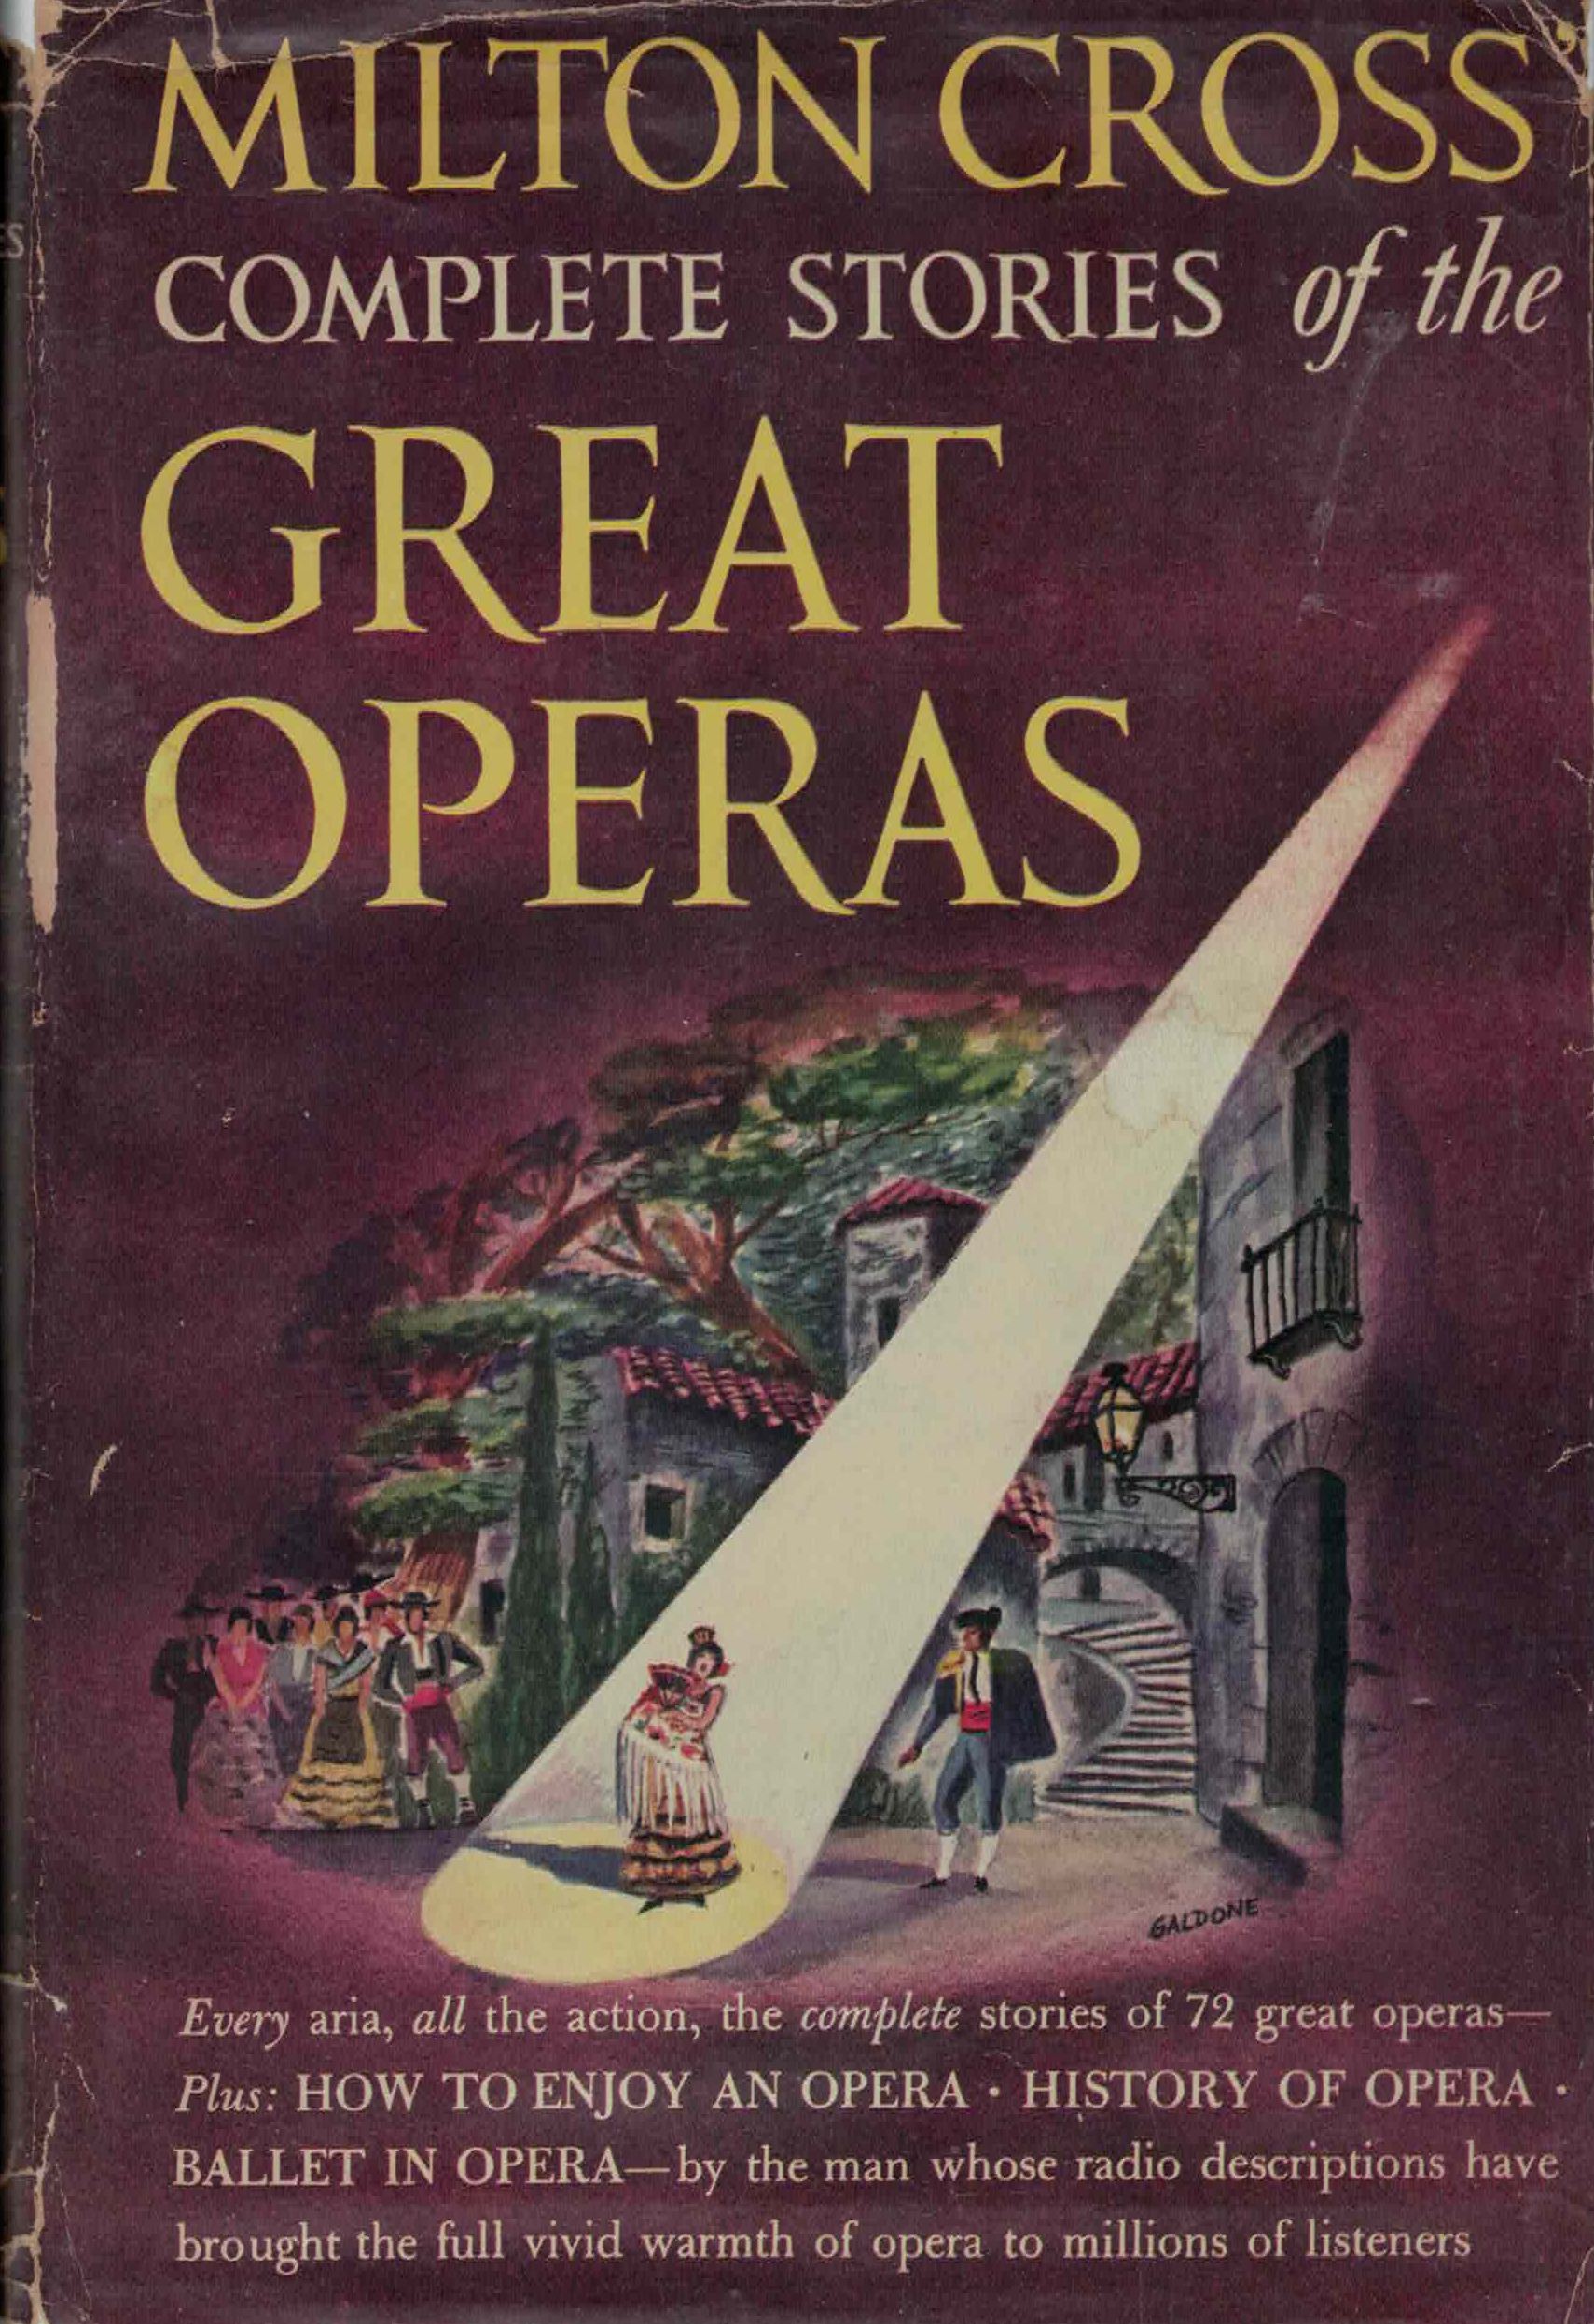 Milton Cross' Complete Stories of the Great Operas (Hardcover, 1949, Doubleday)